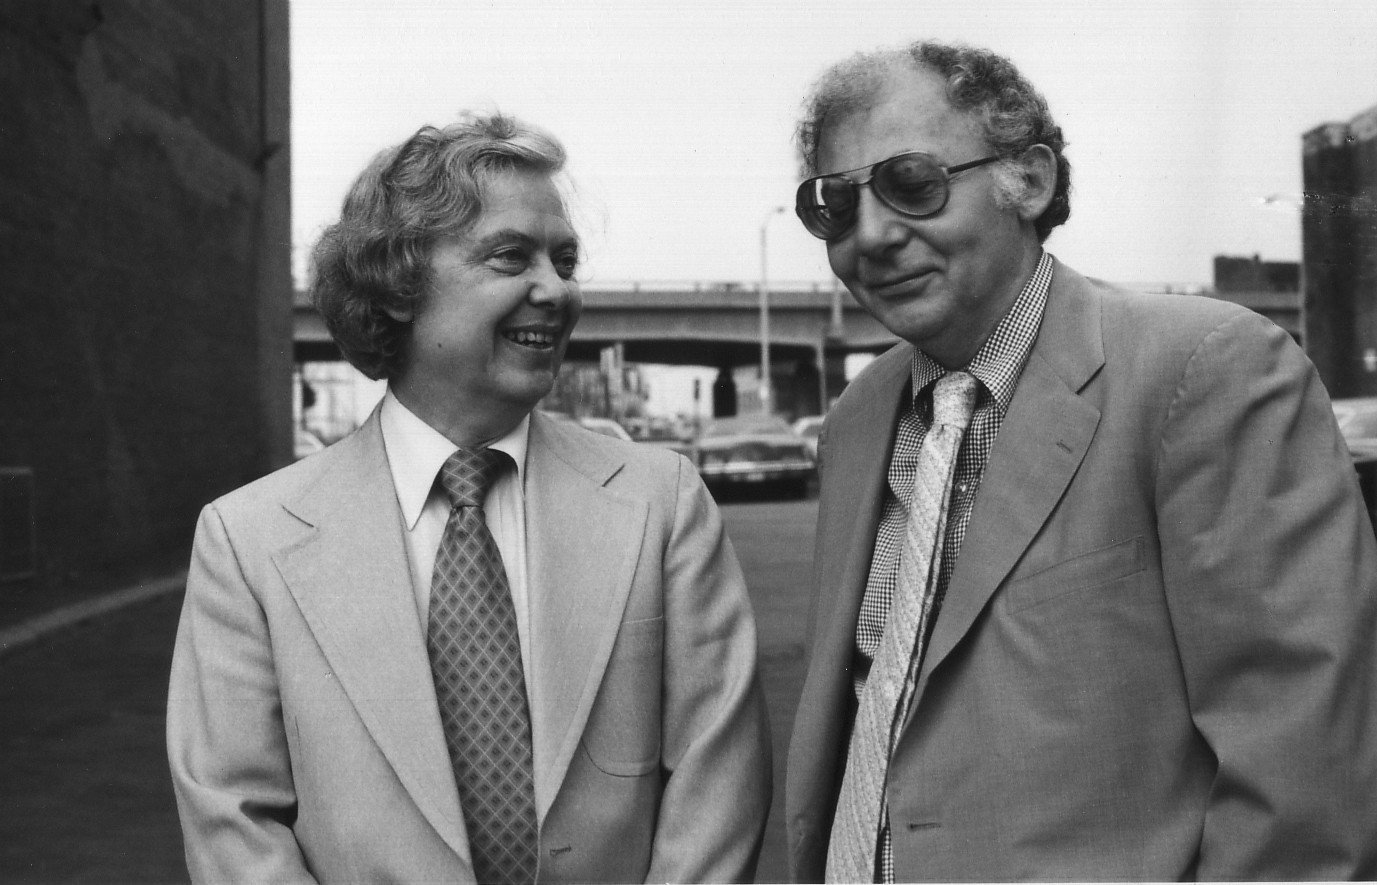 Can\t believe I almost forgot. happy birthday Stanley Elkin! (with William Gass) 